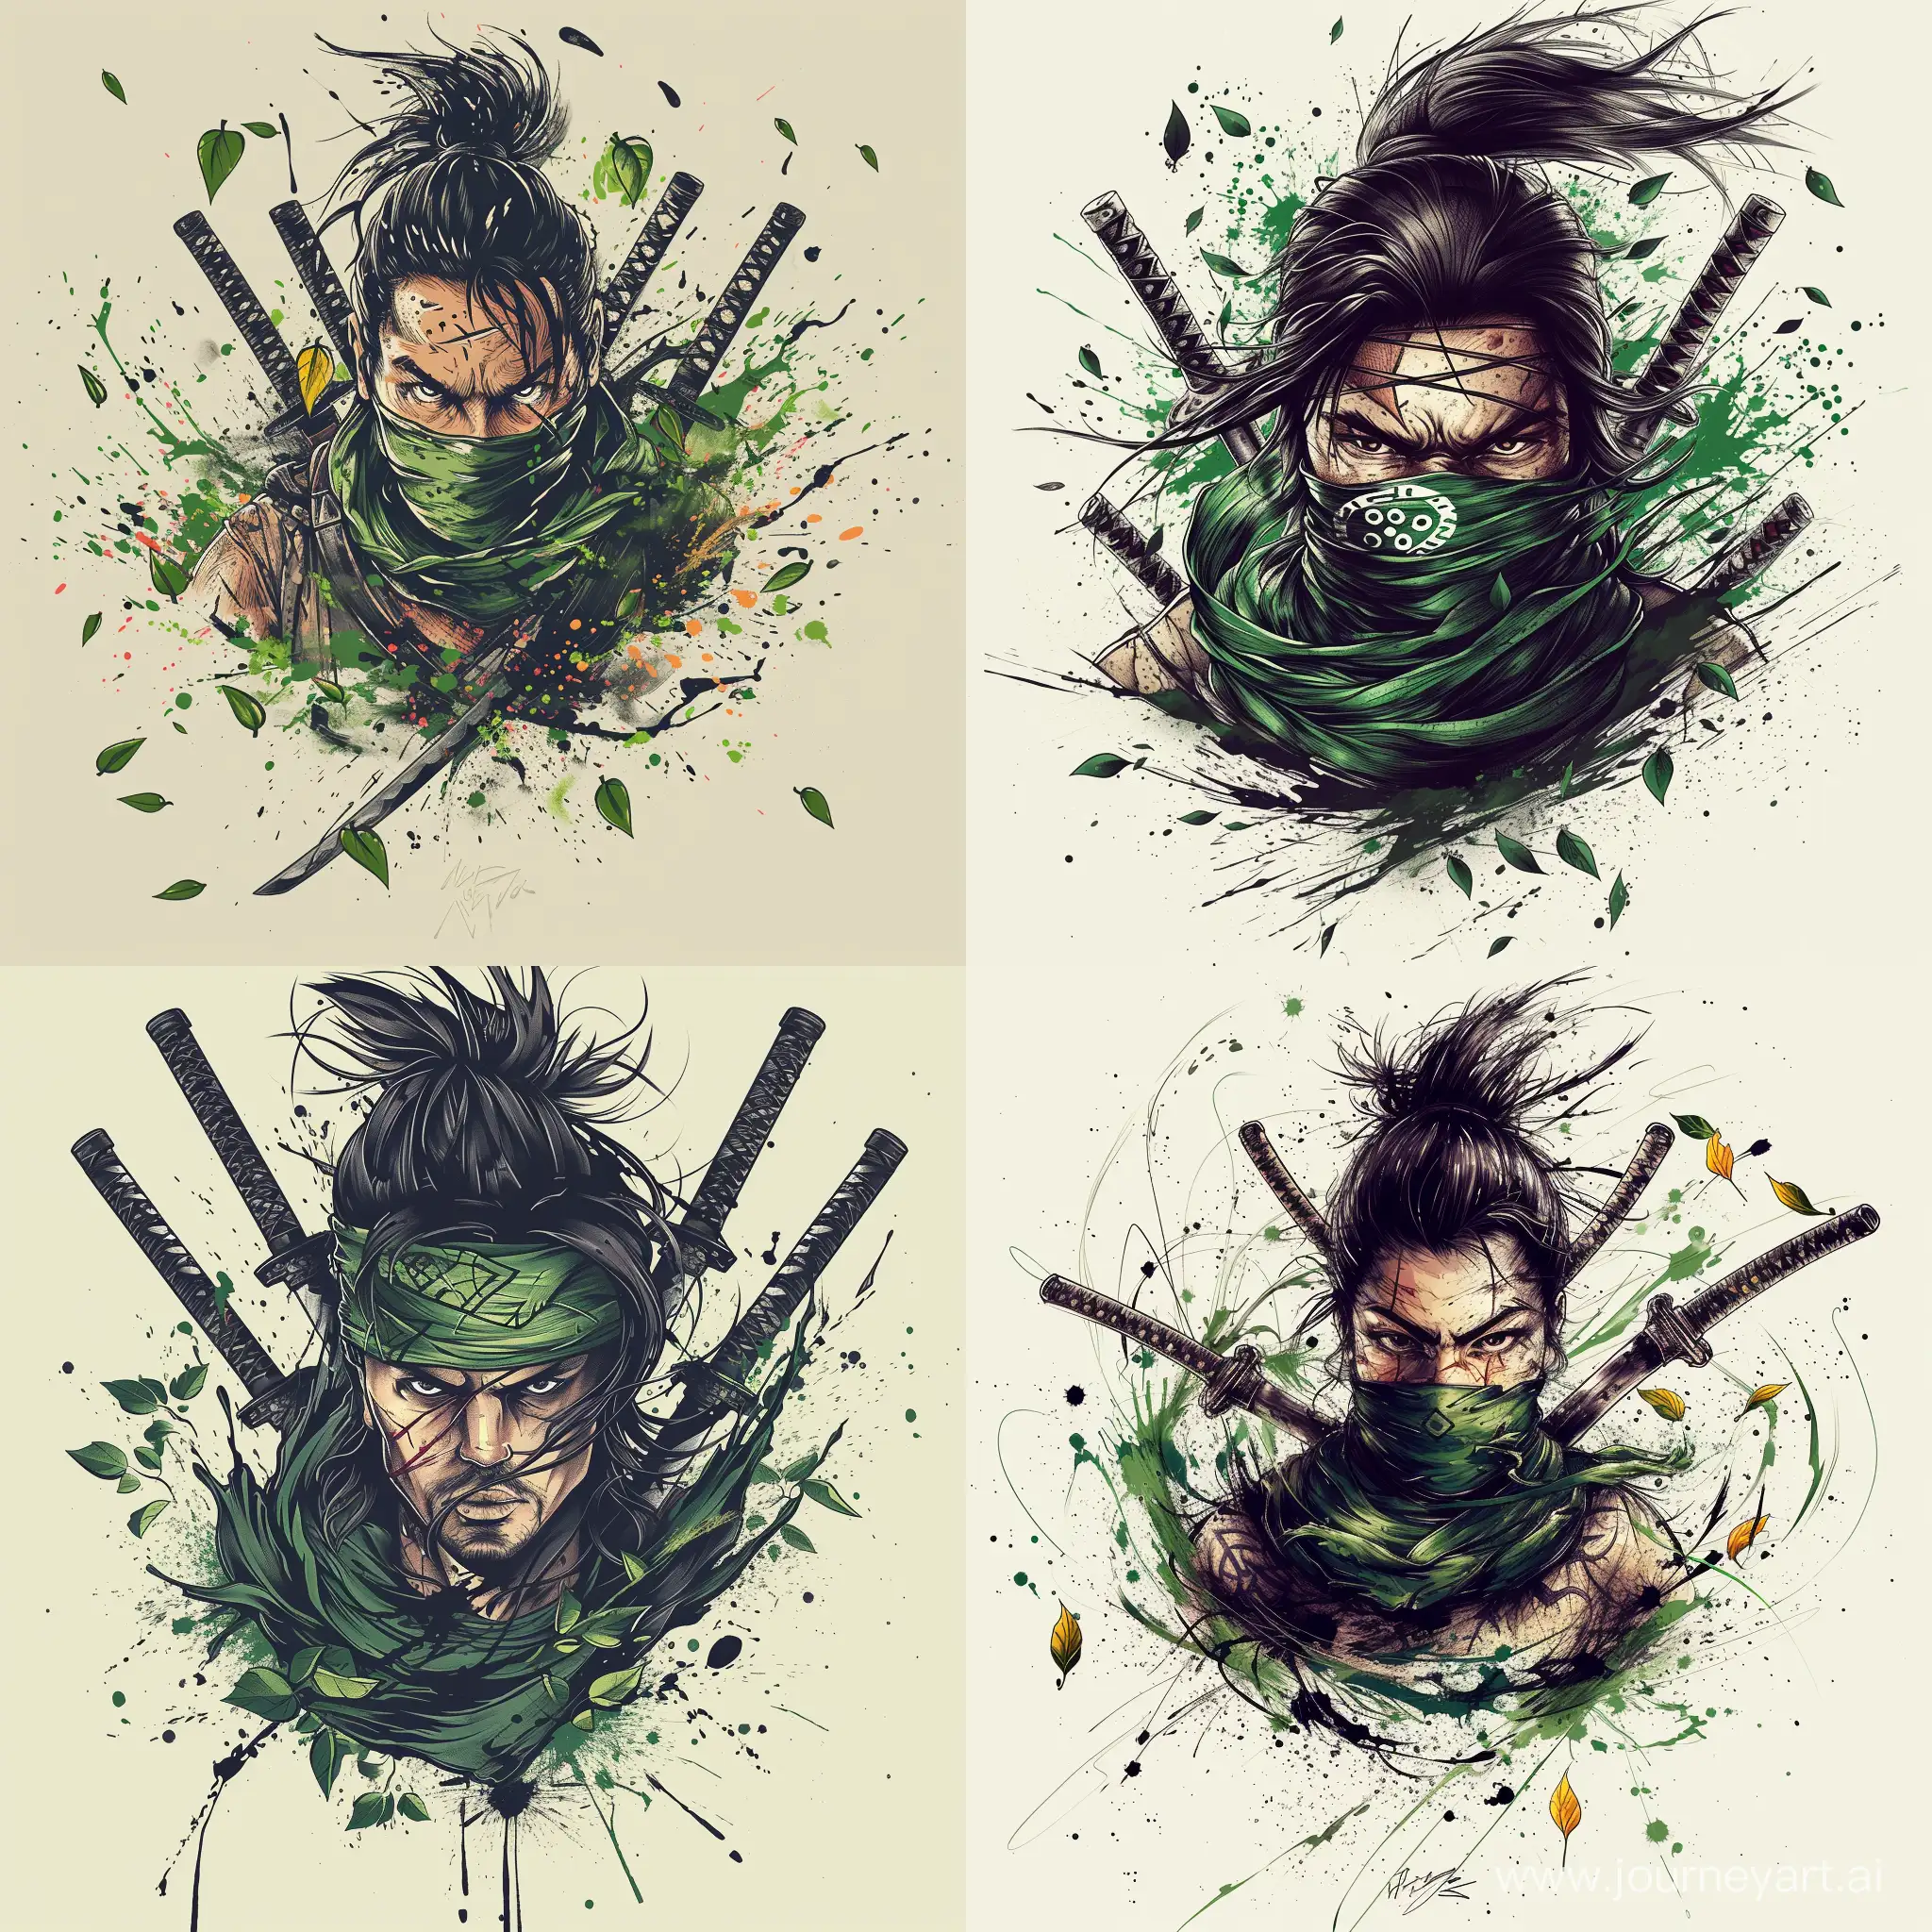 /imagine prompt: A detailed tattoo design of a warrior with three swords, intense gaze, green bandana, amidst a whirl of leaves. Background: abstract ink splashes. Created Using: fine line detailing, high contrast, dynamic poses, realistic textures, vibrant green accents, shadowing techniques, ink wash effect, hd quality, natural look